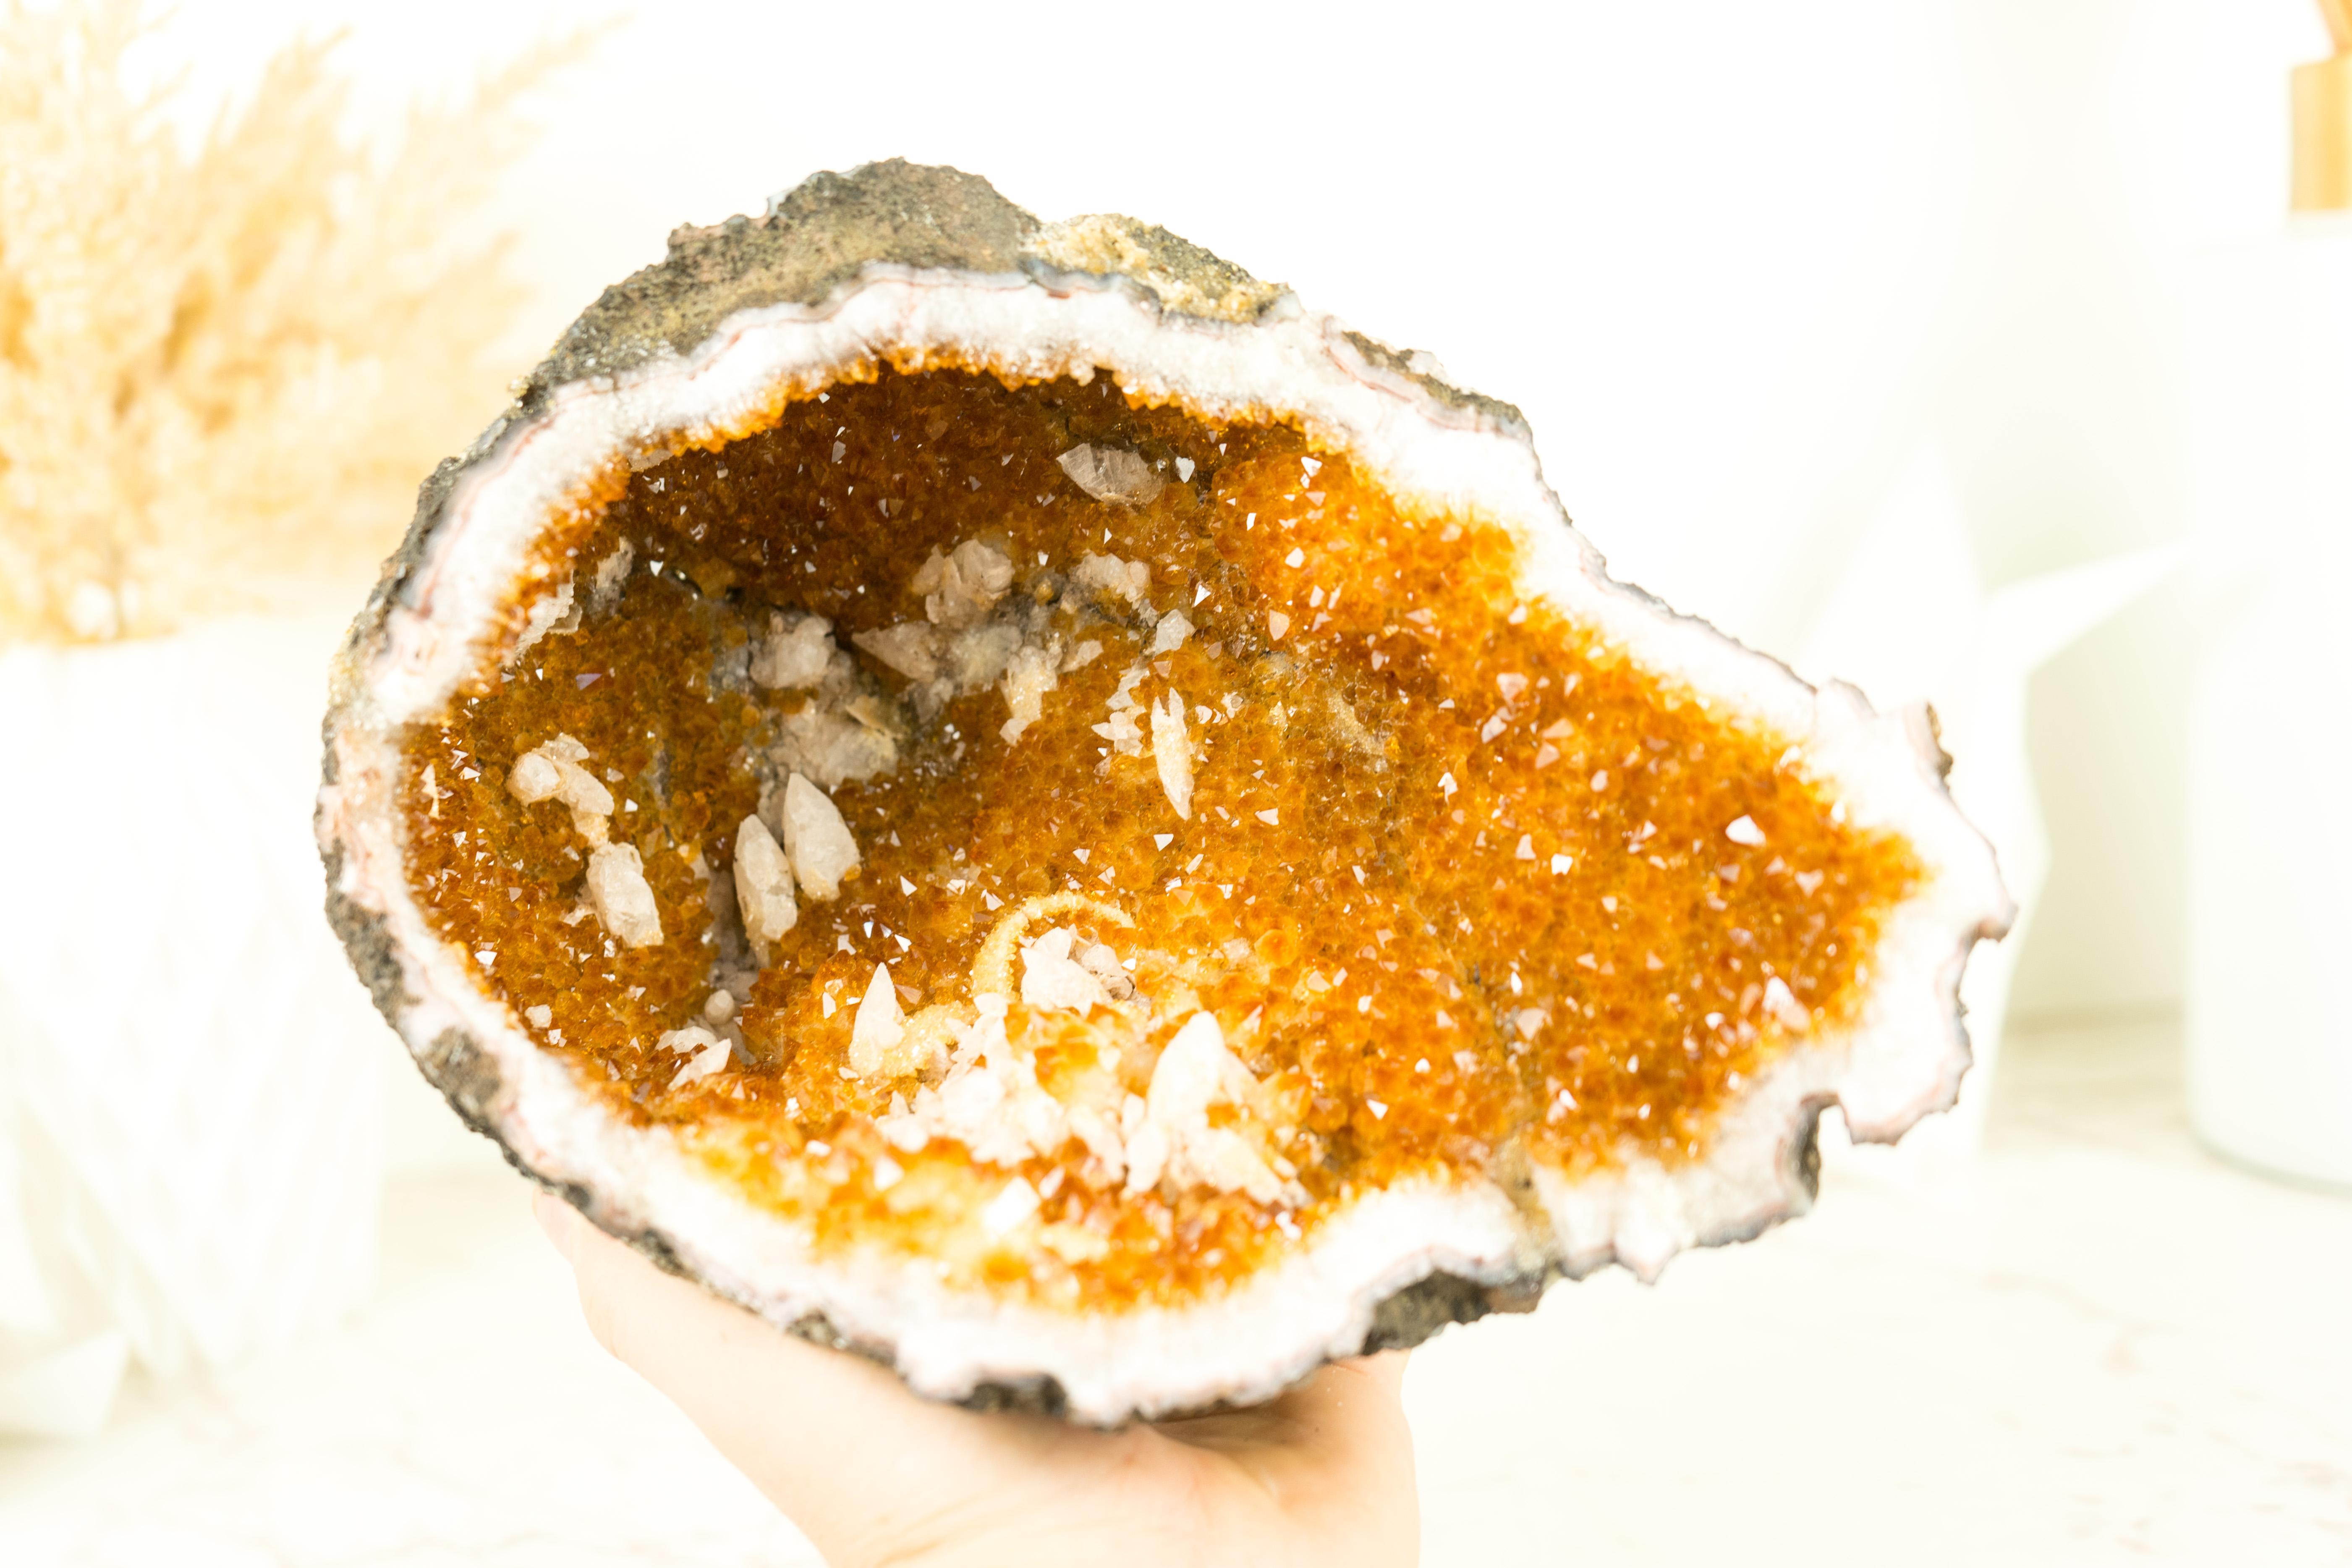 With its golden orange color tone and natural, beautiful cave-like shape, this Citrine Geode is a fabulous small Citrine specimen. It is undoubtedly a Citrine that will serve as a stunning accent piece, seamlessly adding to any space or